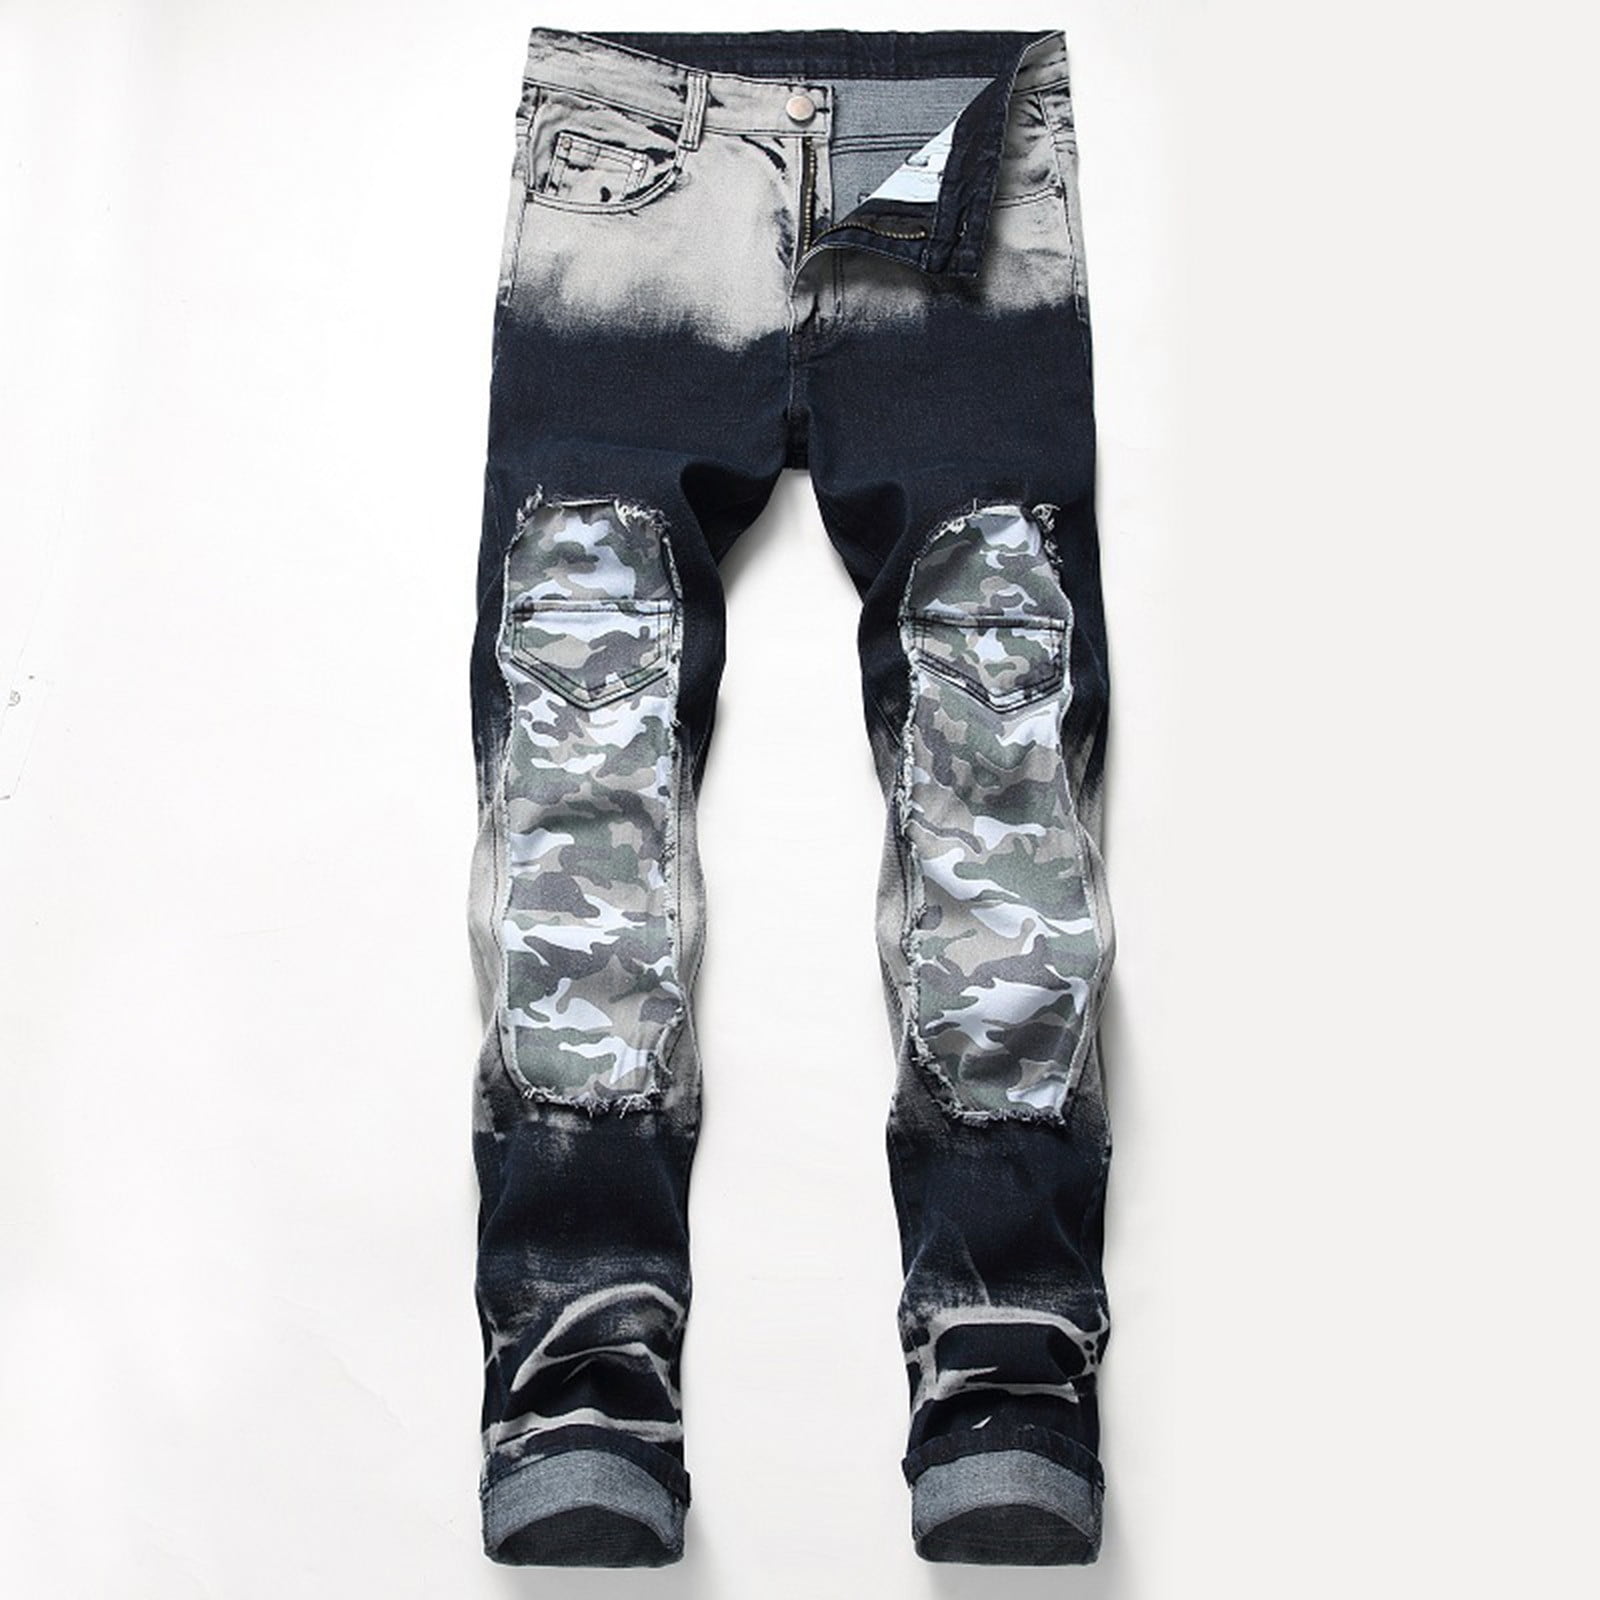 Men's Slim Fit Patchwork Jeans Hip Hop Straight with Zip Cargo Denim Pants  (Black-red,29,29) at  Men's Clothing store